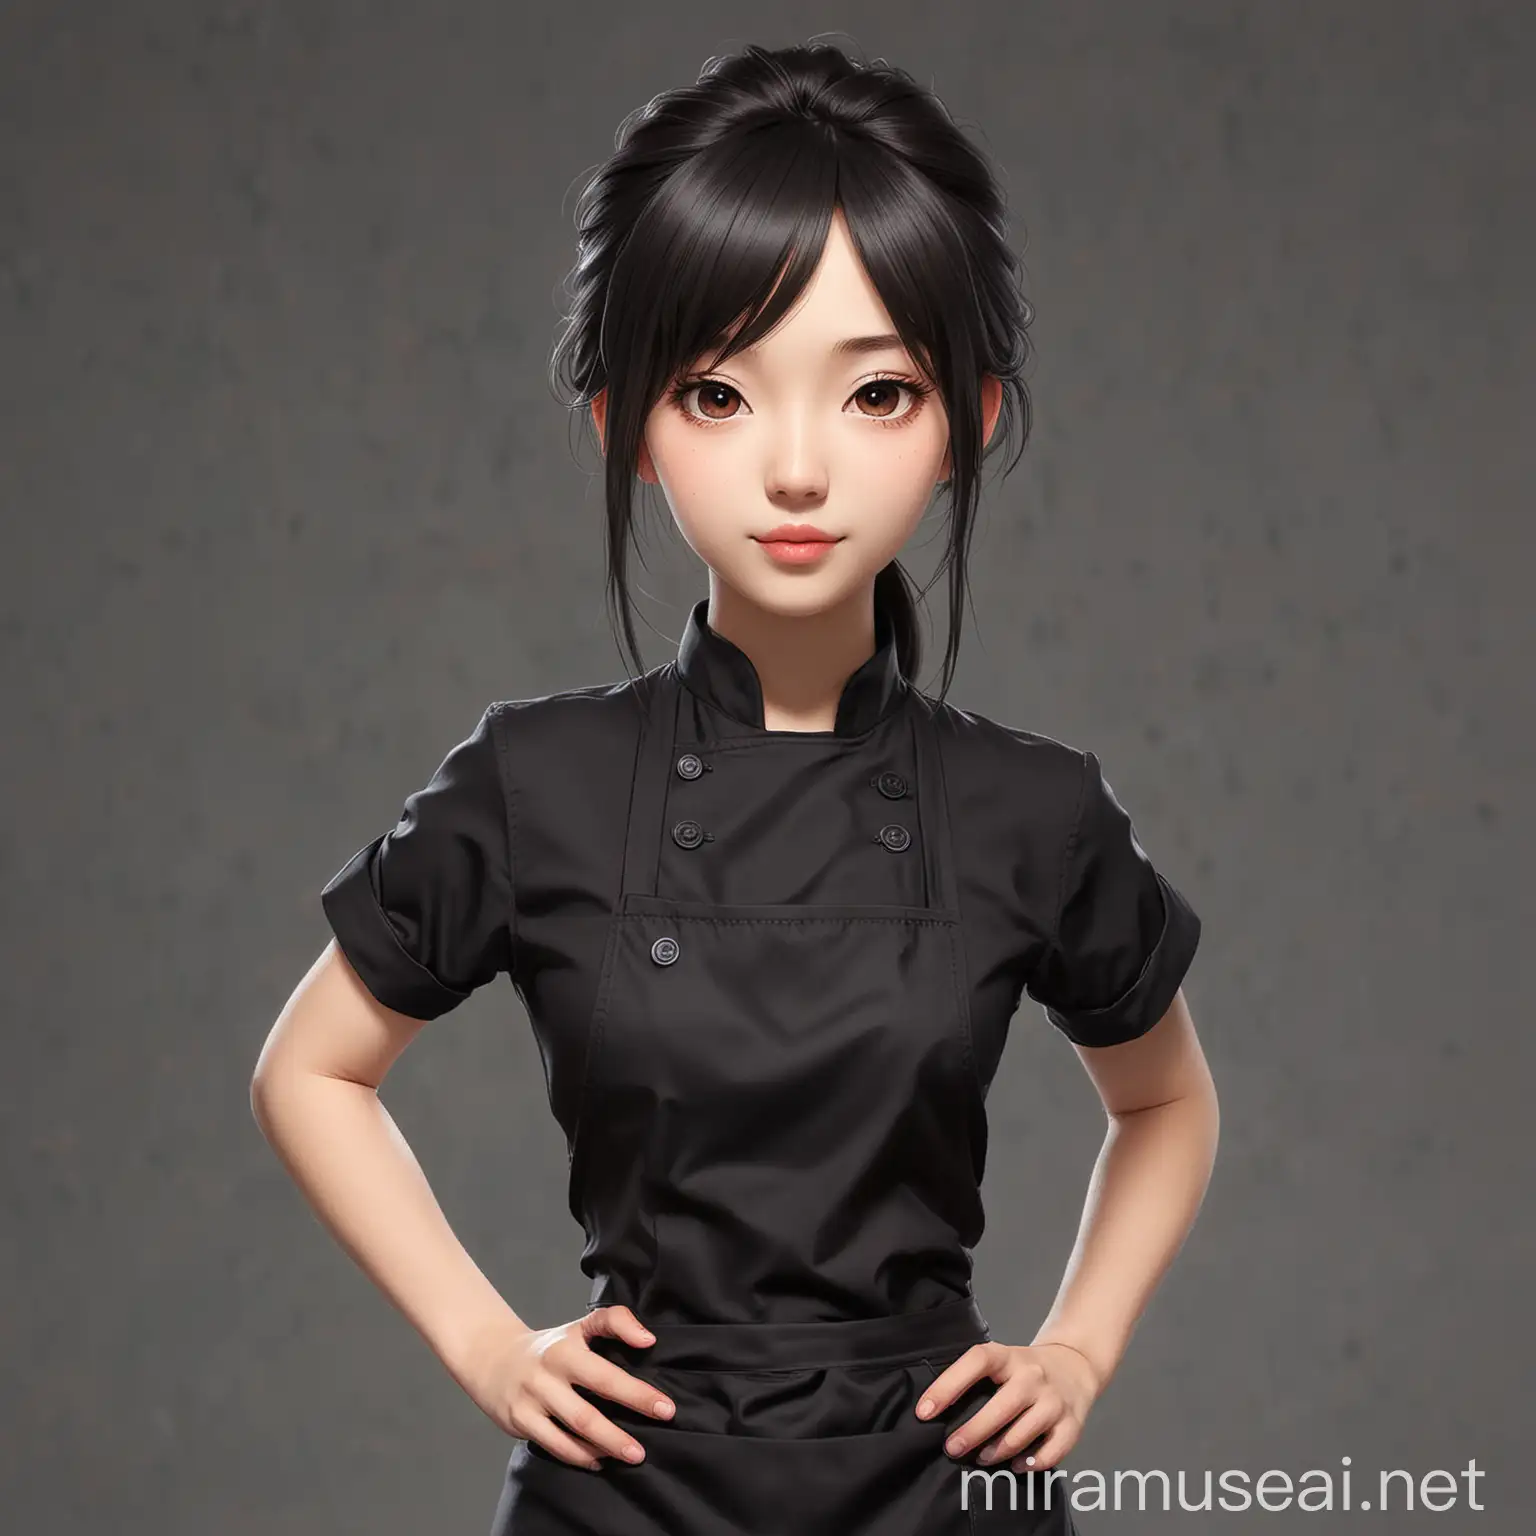 Asian Anime Chef Young Woman in Black Shirt and Apron